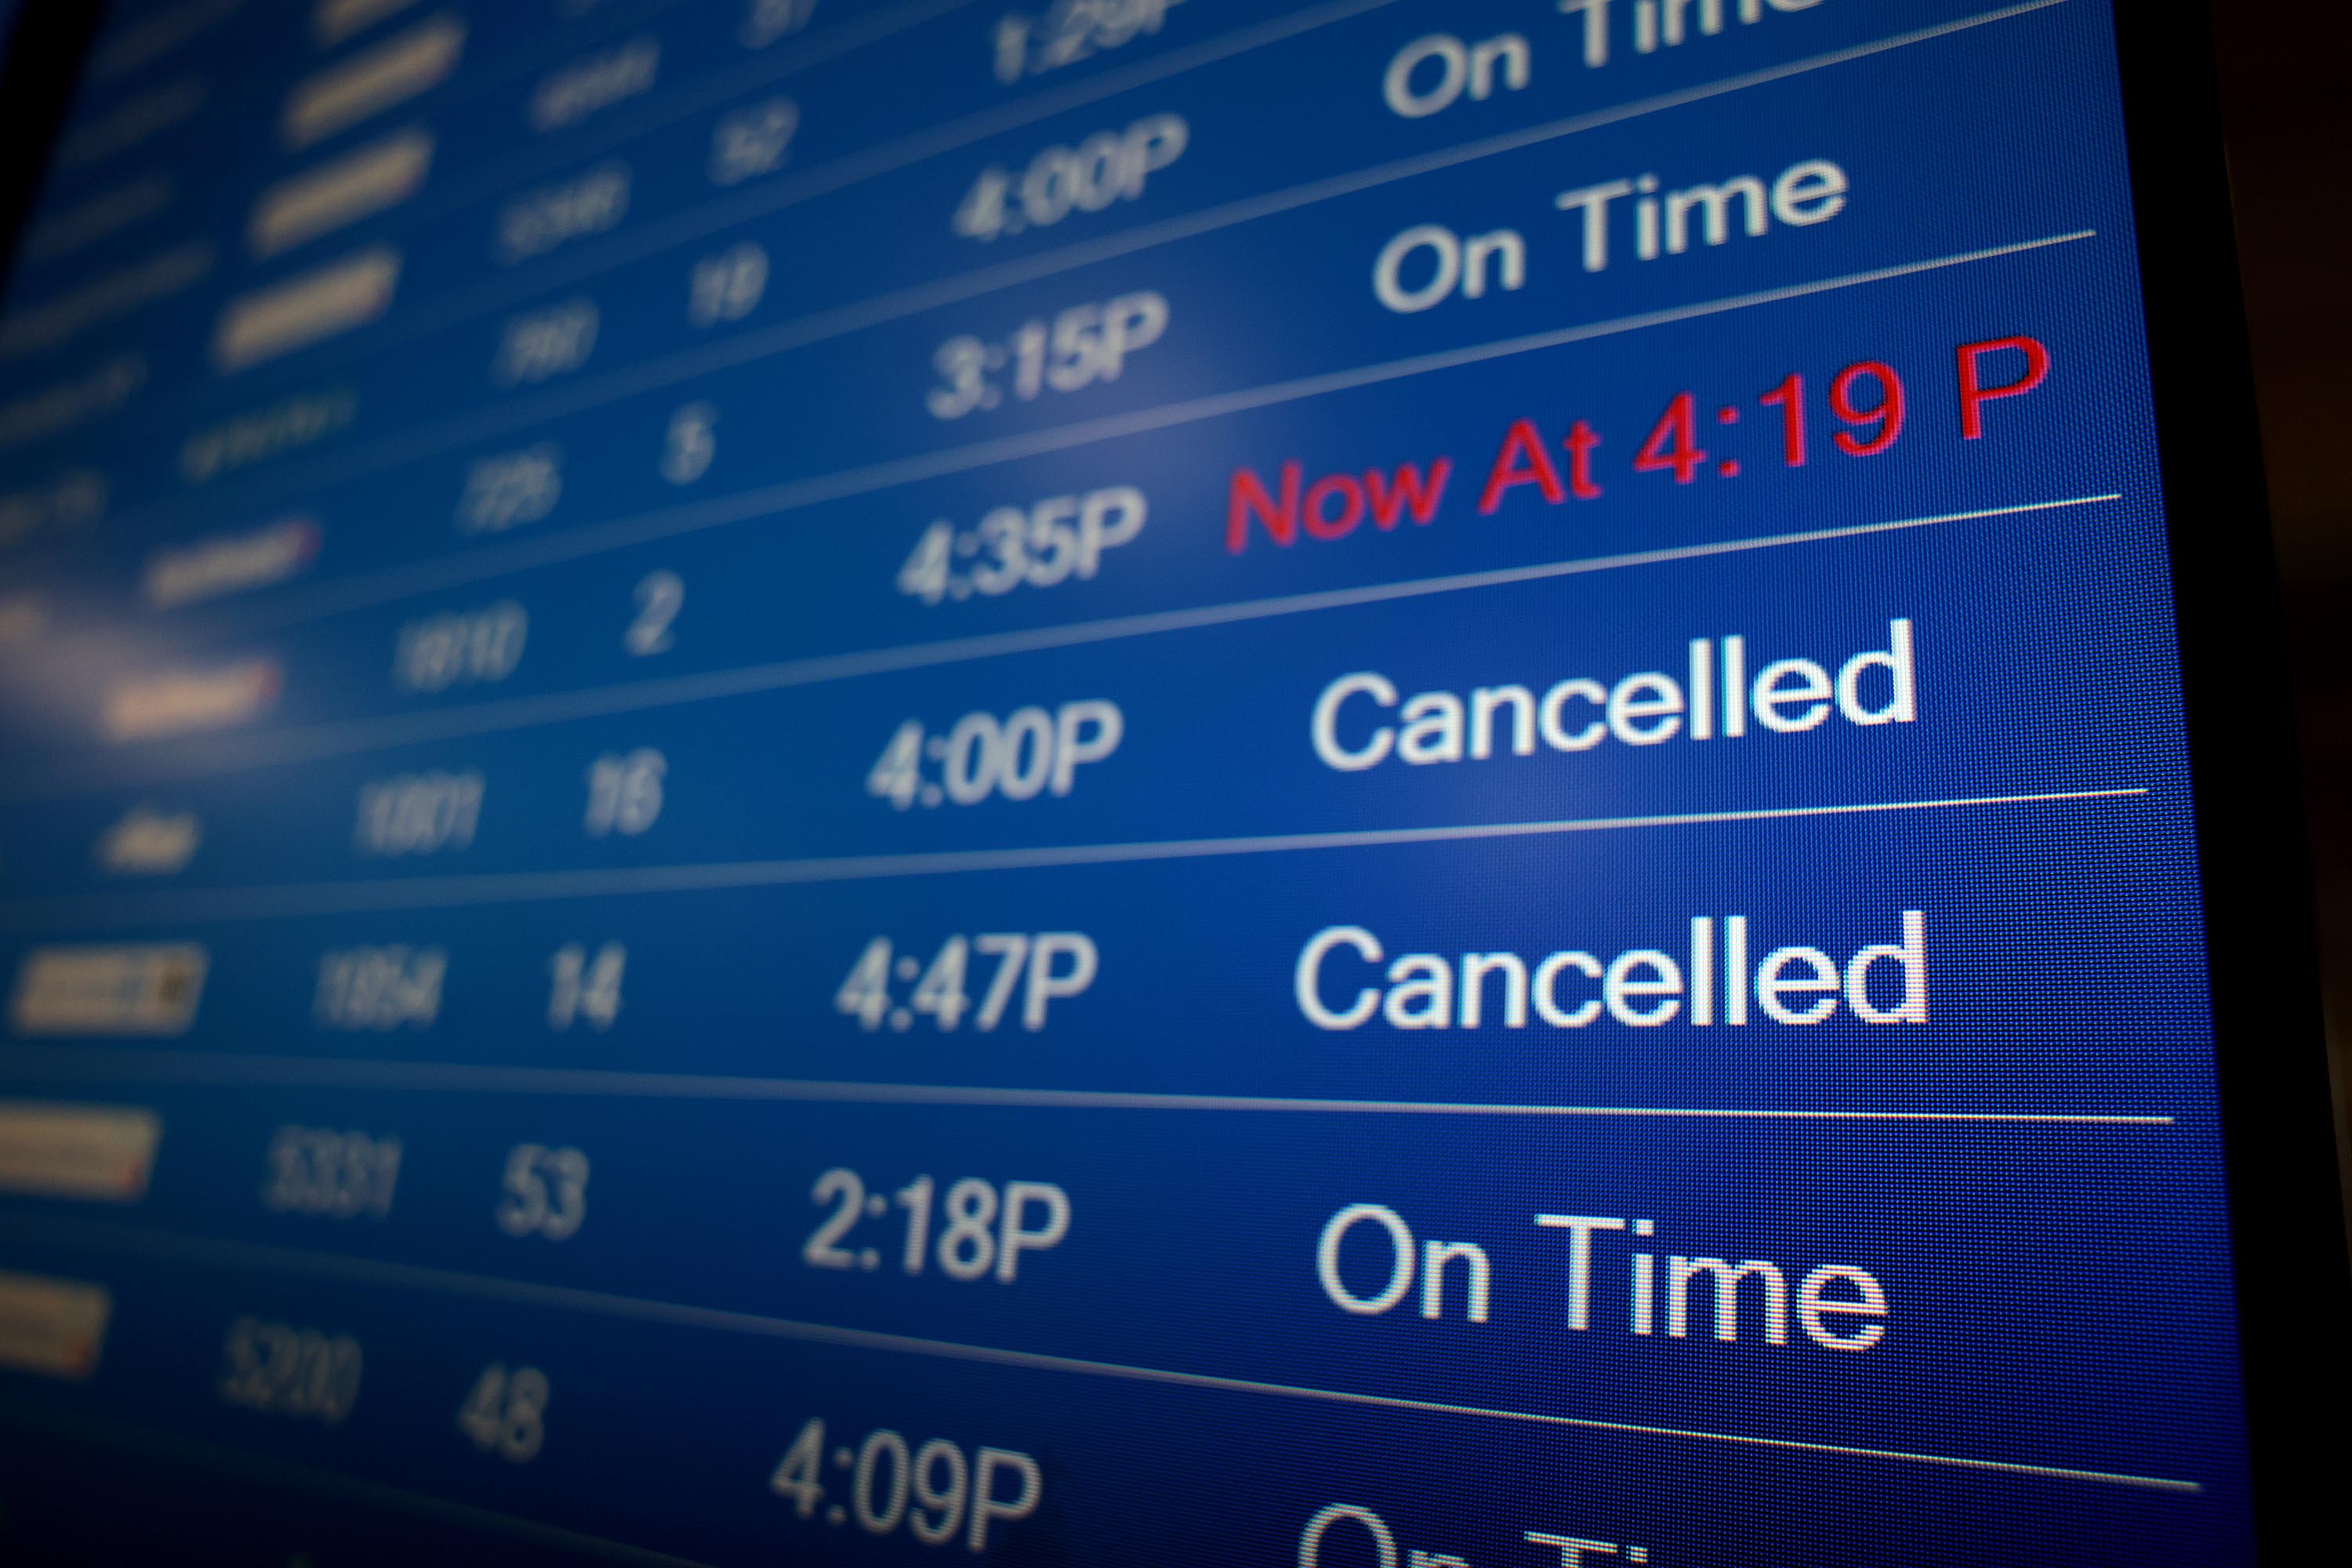 What should I do if my flight has been canceled or delayed? | CNN Travel